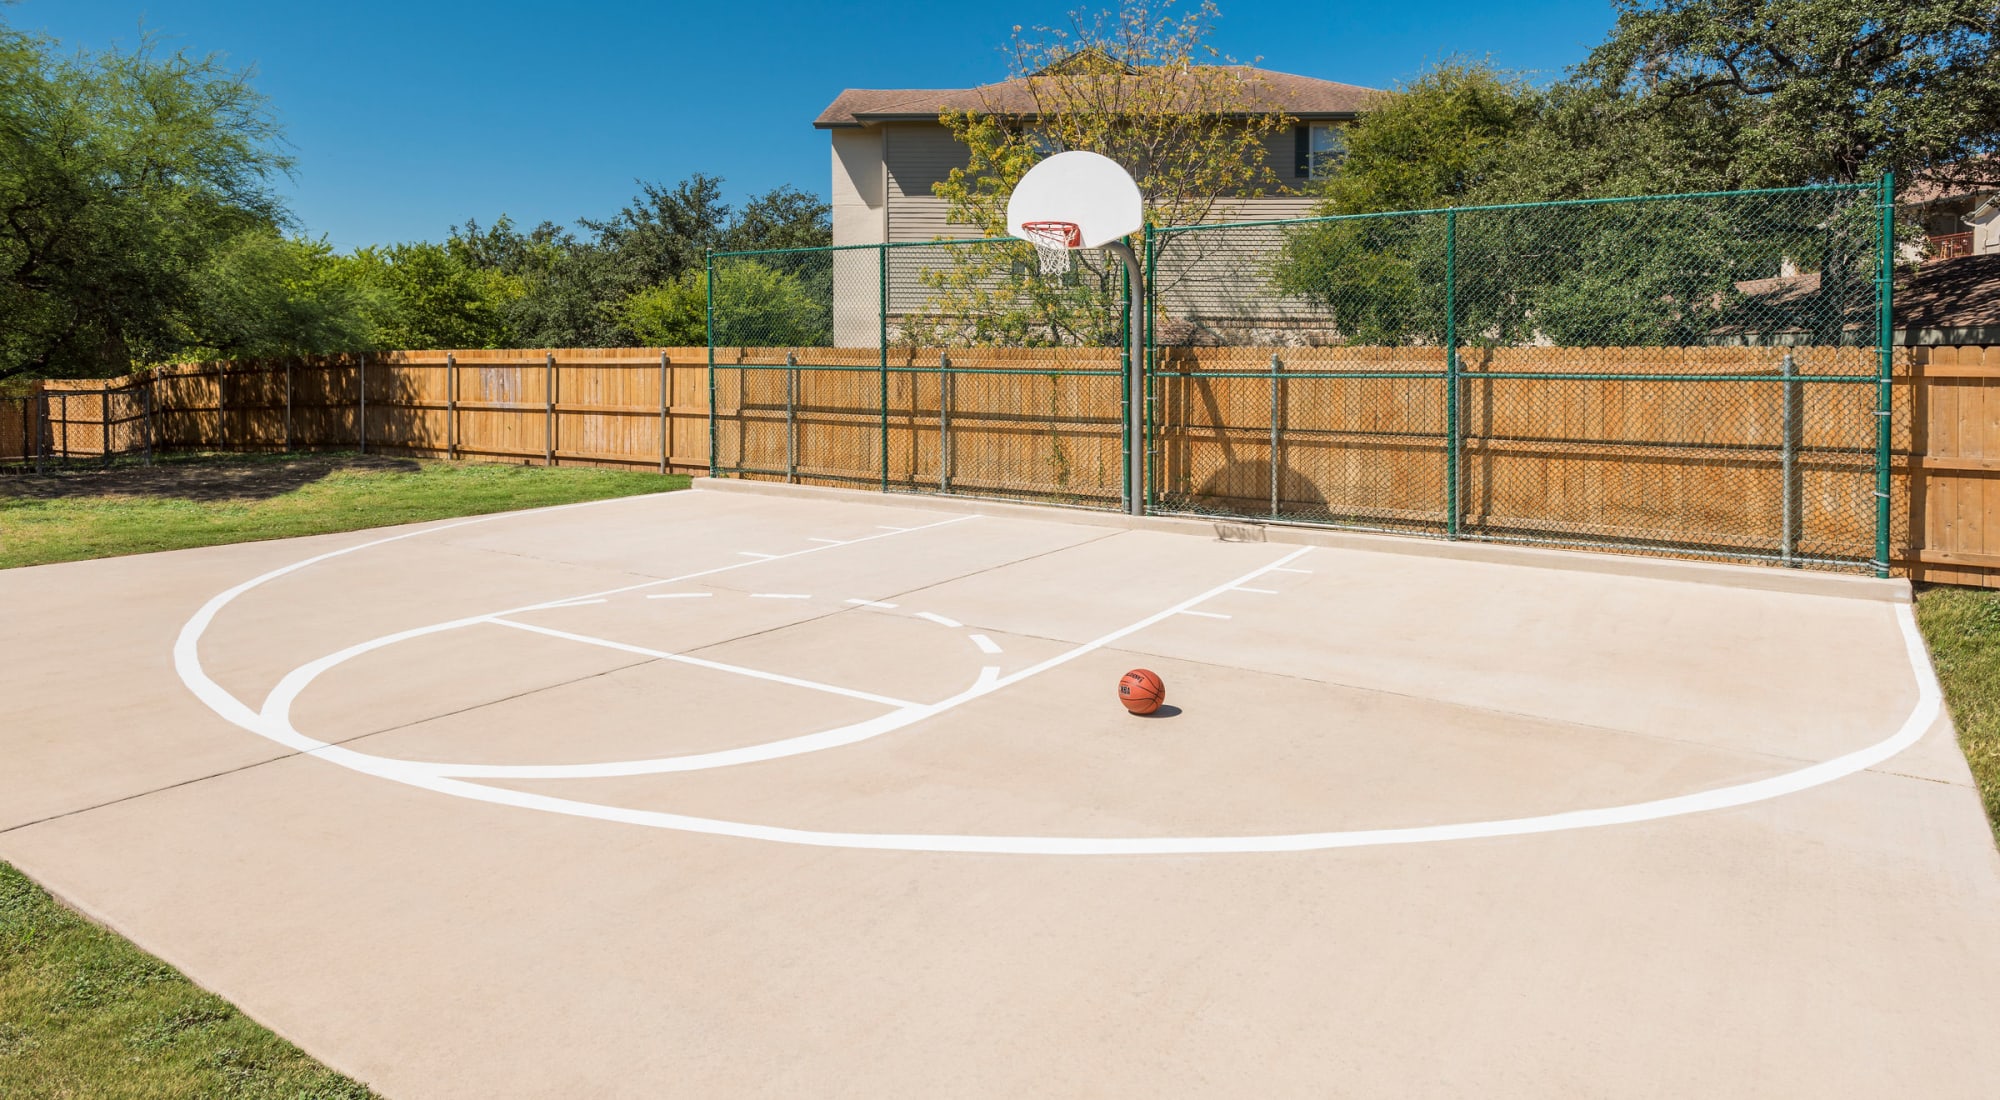 Outdoor basketball court at The Estates of Northwoods